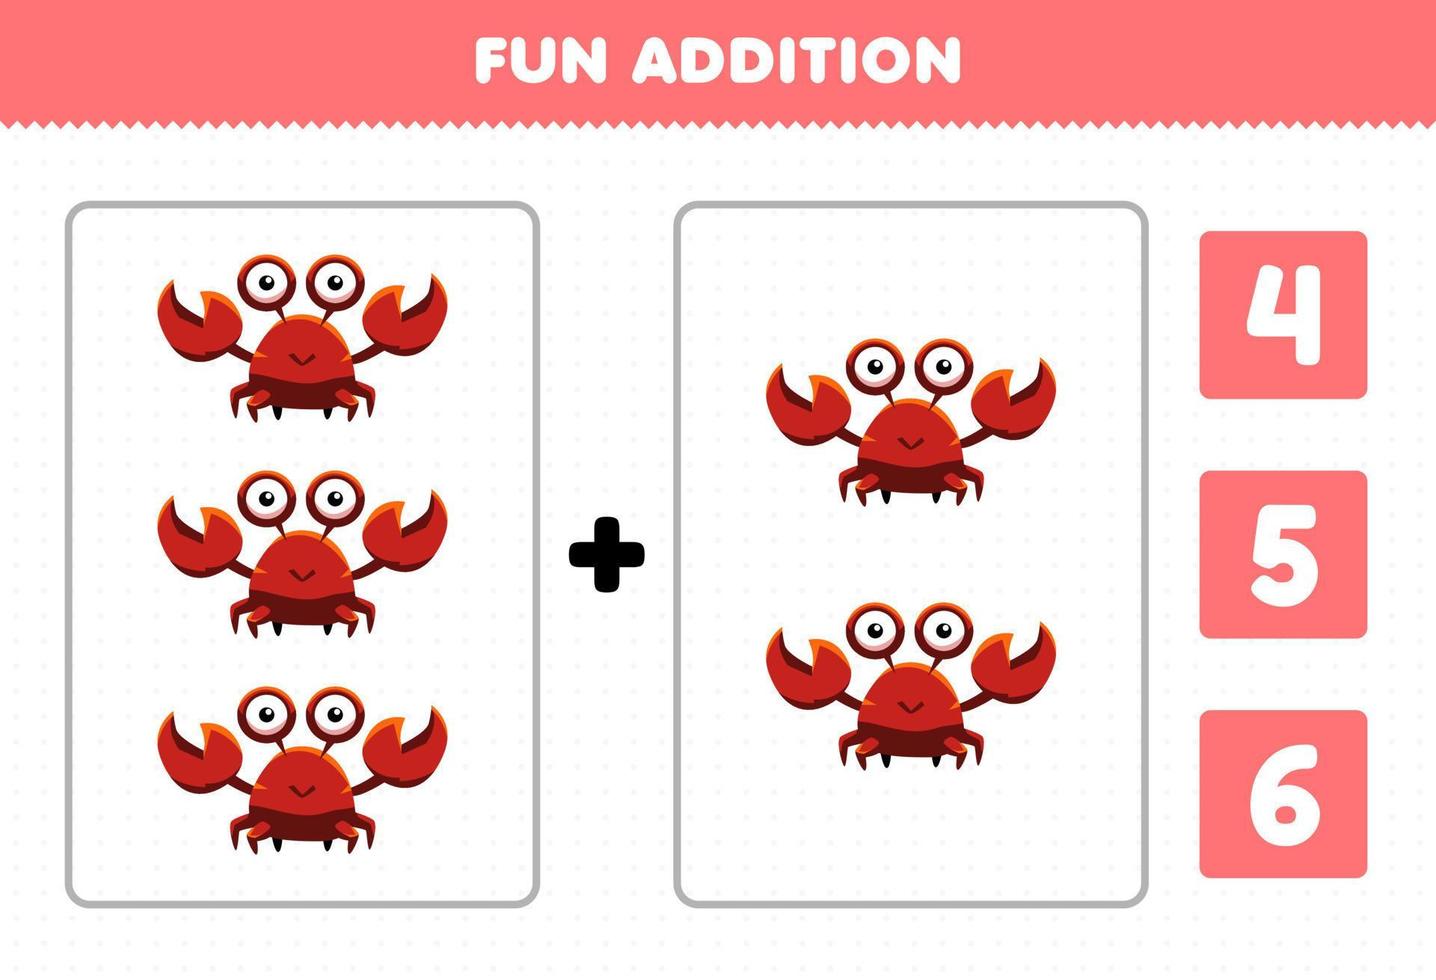 Education game for children fun addition by count and choose the correct answer of cute cartoon underwater animal crab printable worksheet vector